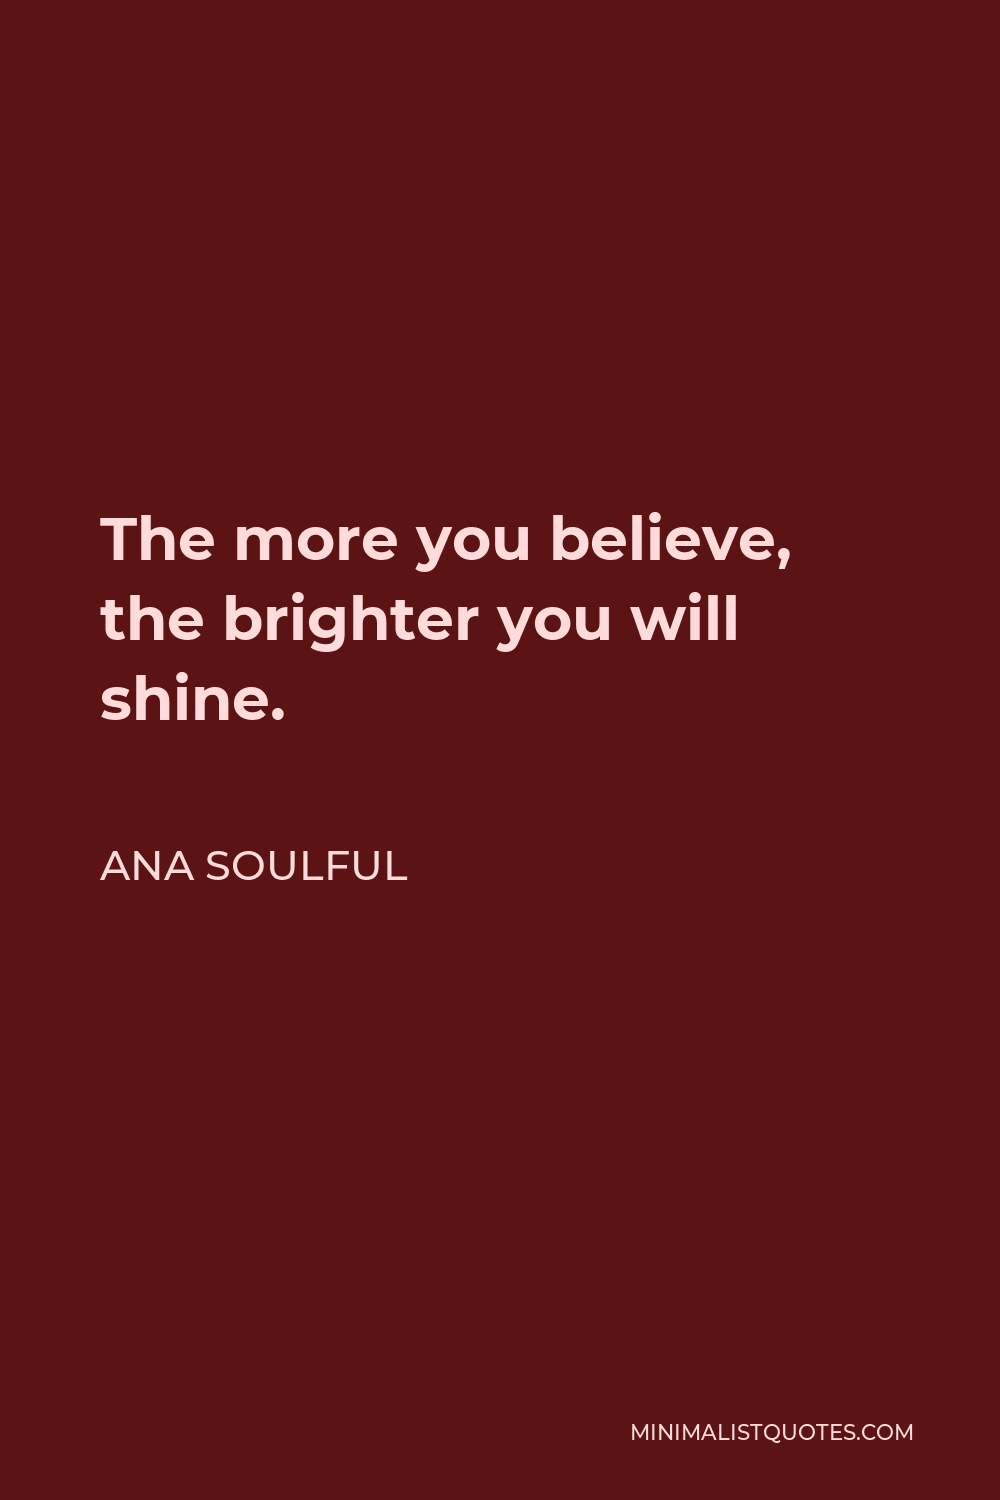 Ana Soulful Quote - The more you believe, the brighter you will shine.